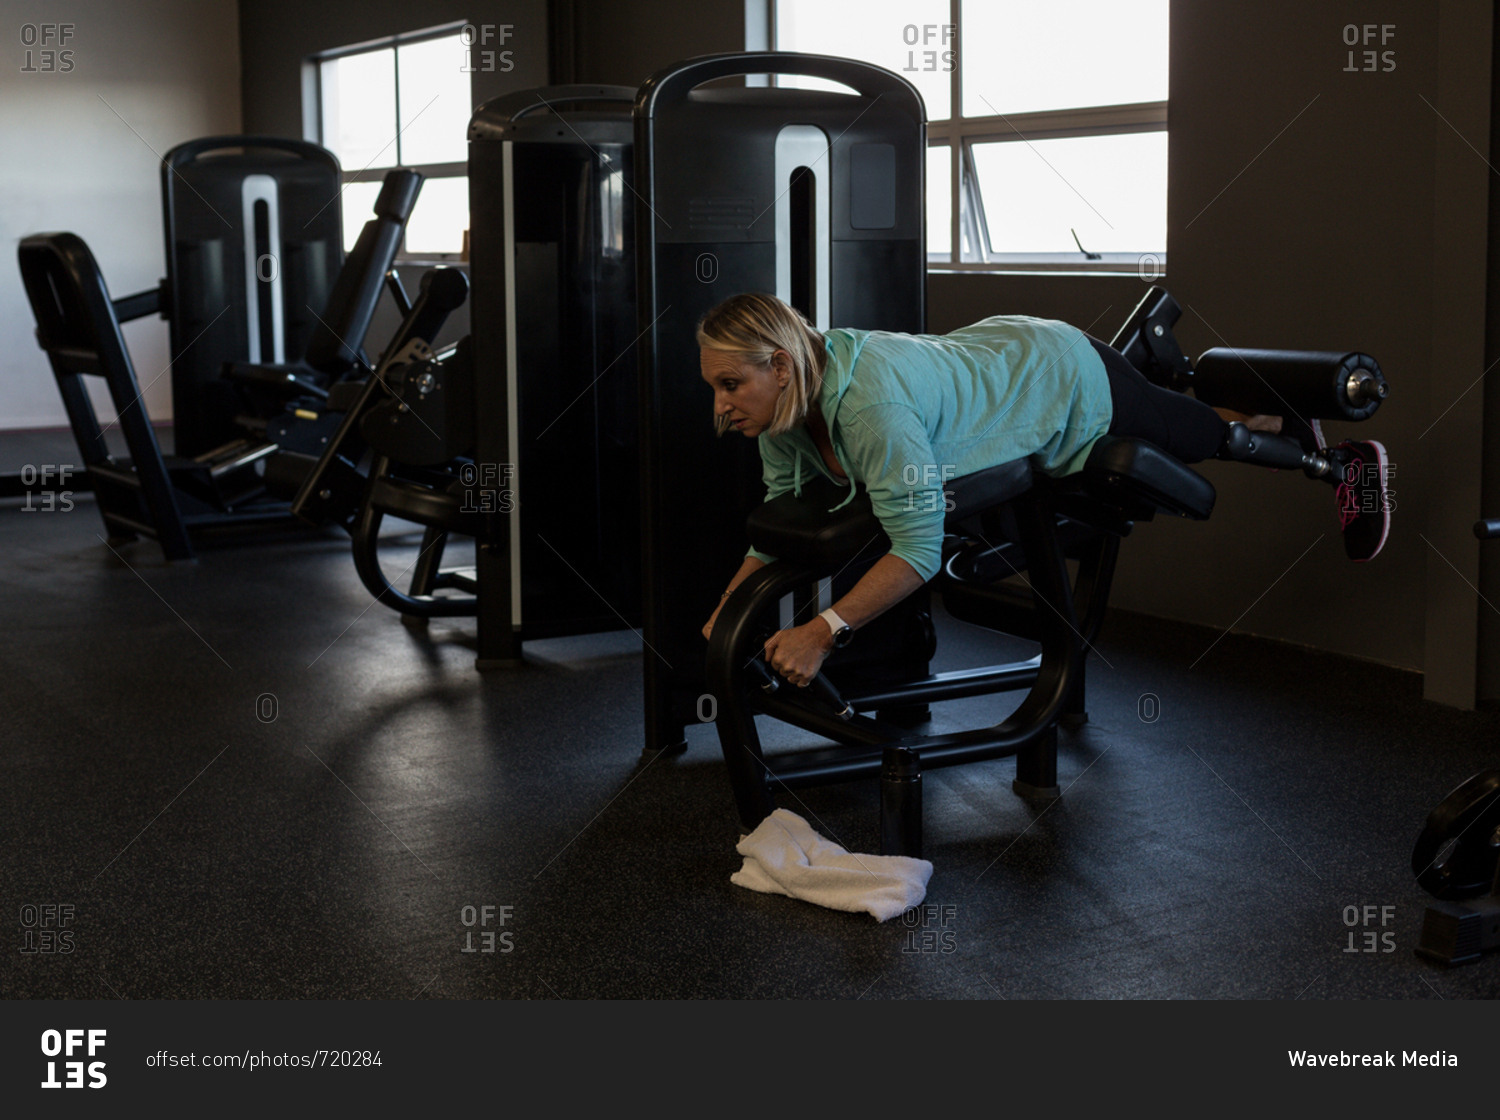 Disabled woman exercising on machine in the gym